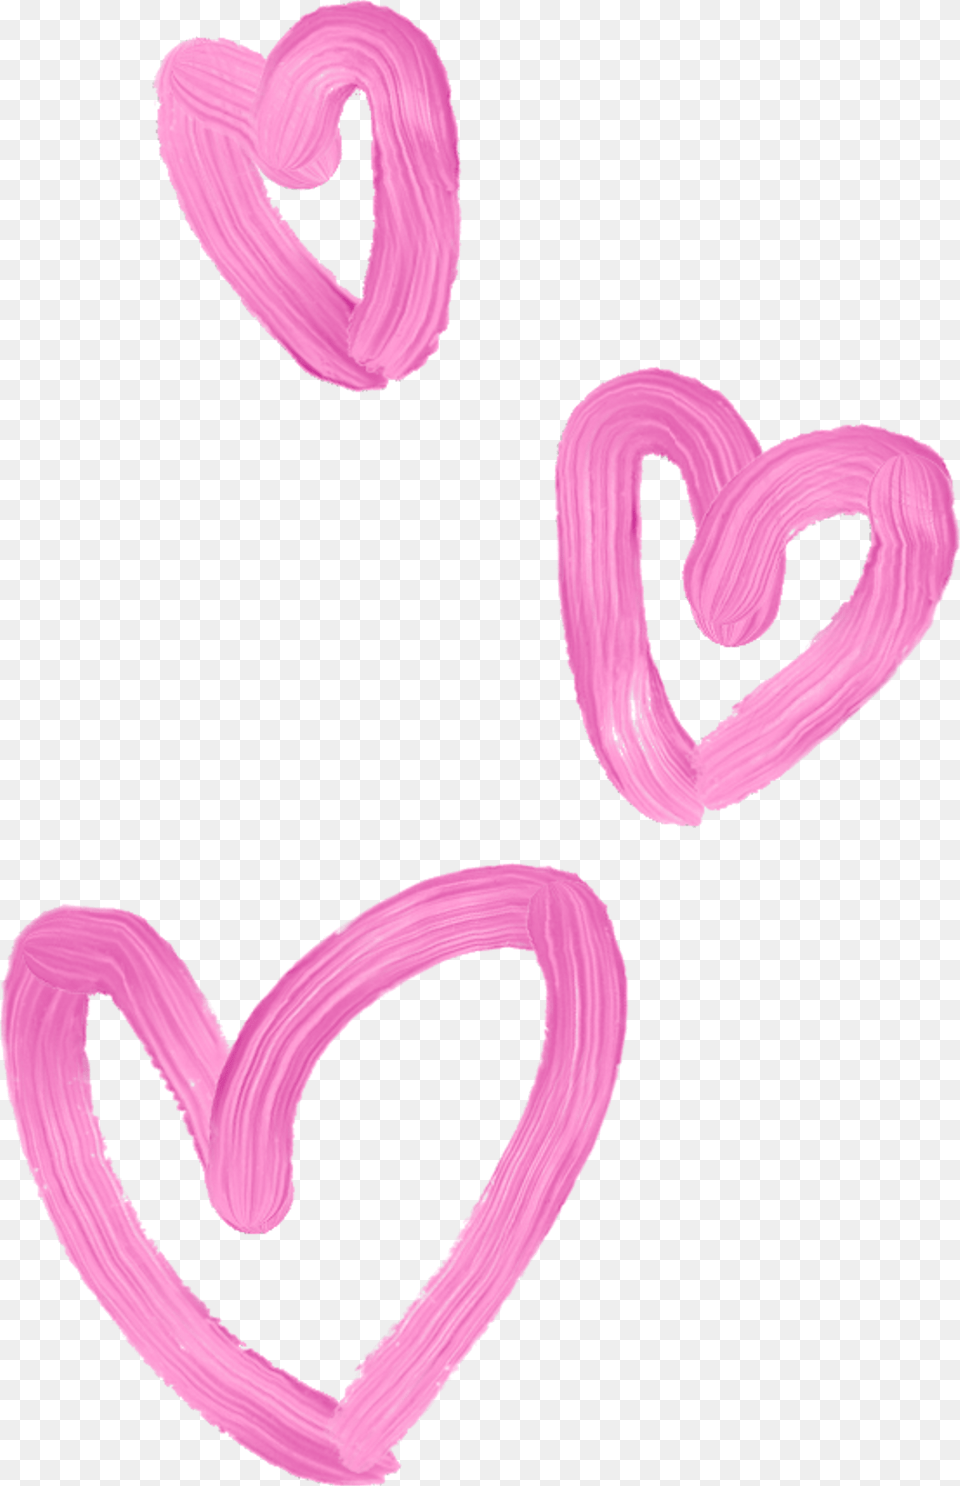 Lovely Girly Hearts Corazones Tiara 3d Whatsapp Pink Girly, Heart, Purple Free Transparent Png